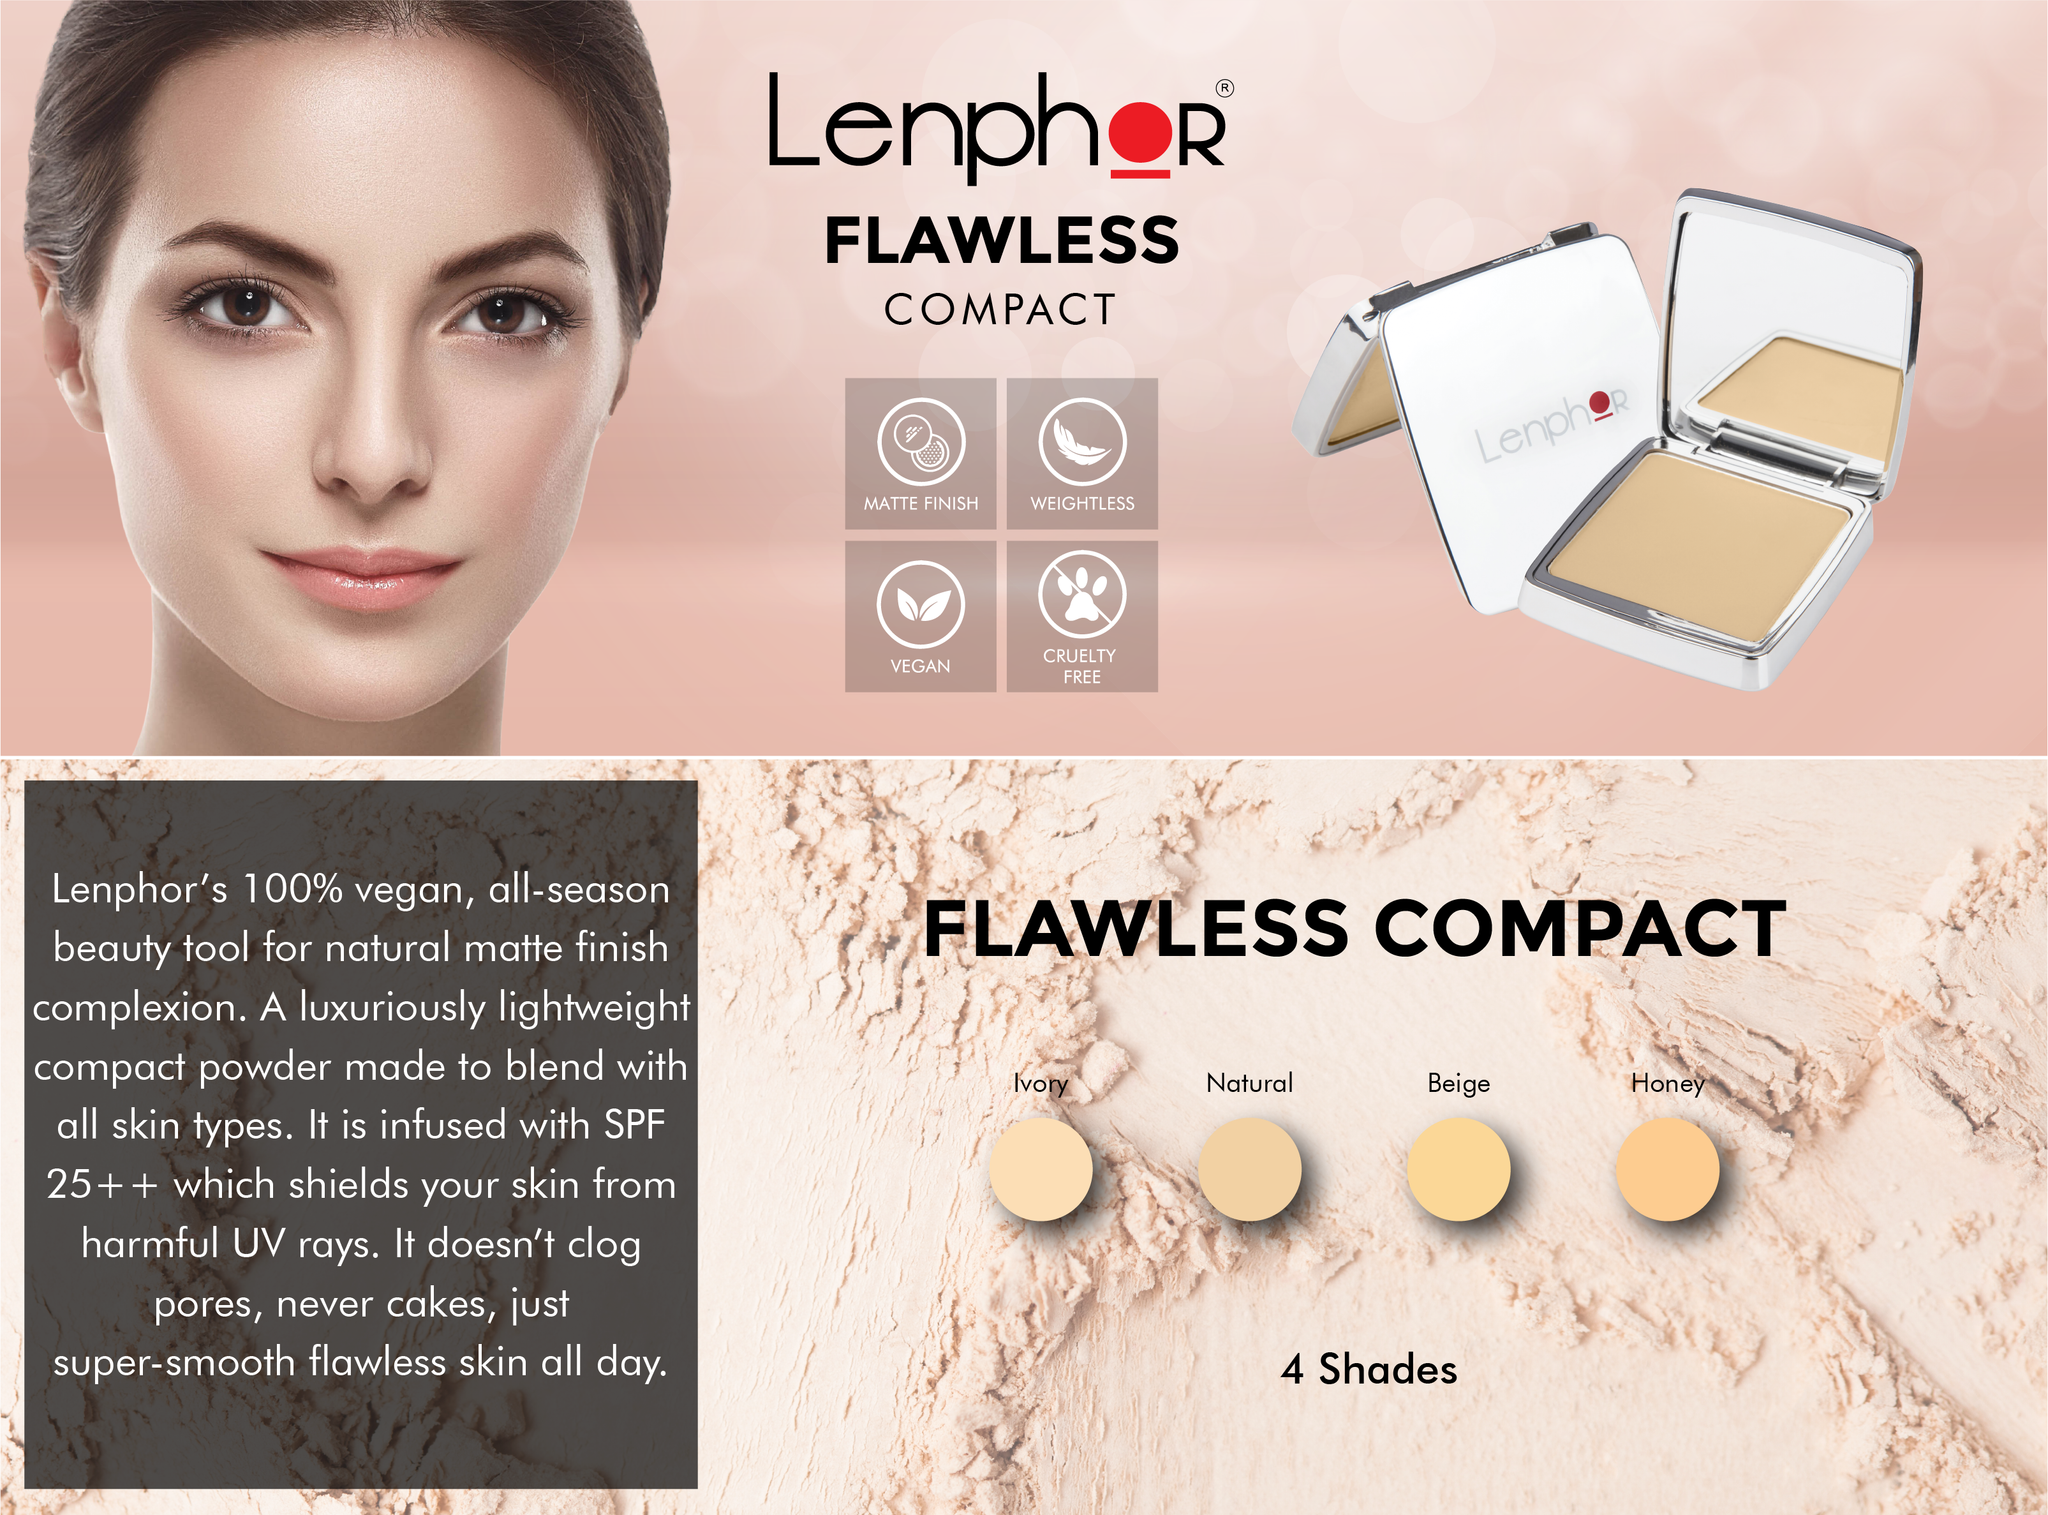 Flawless compact